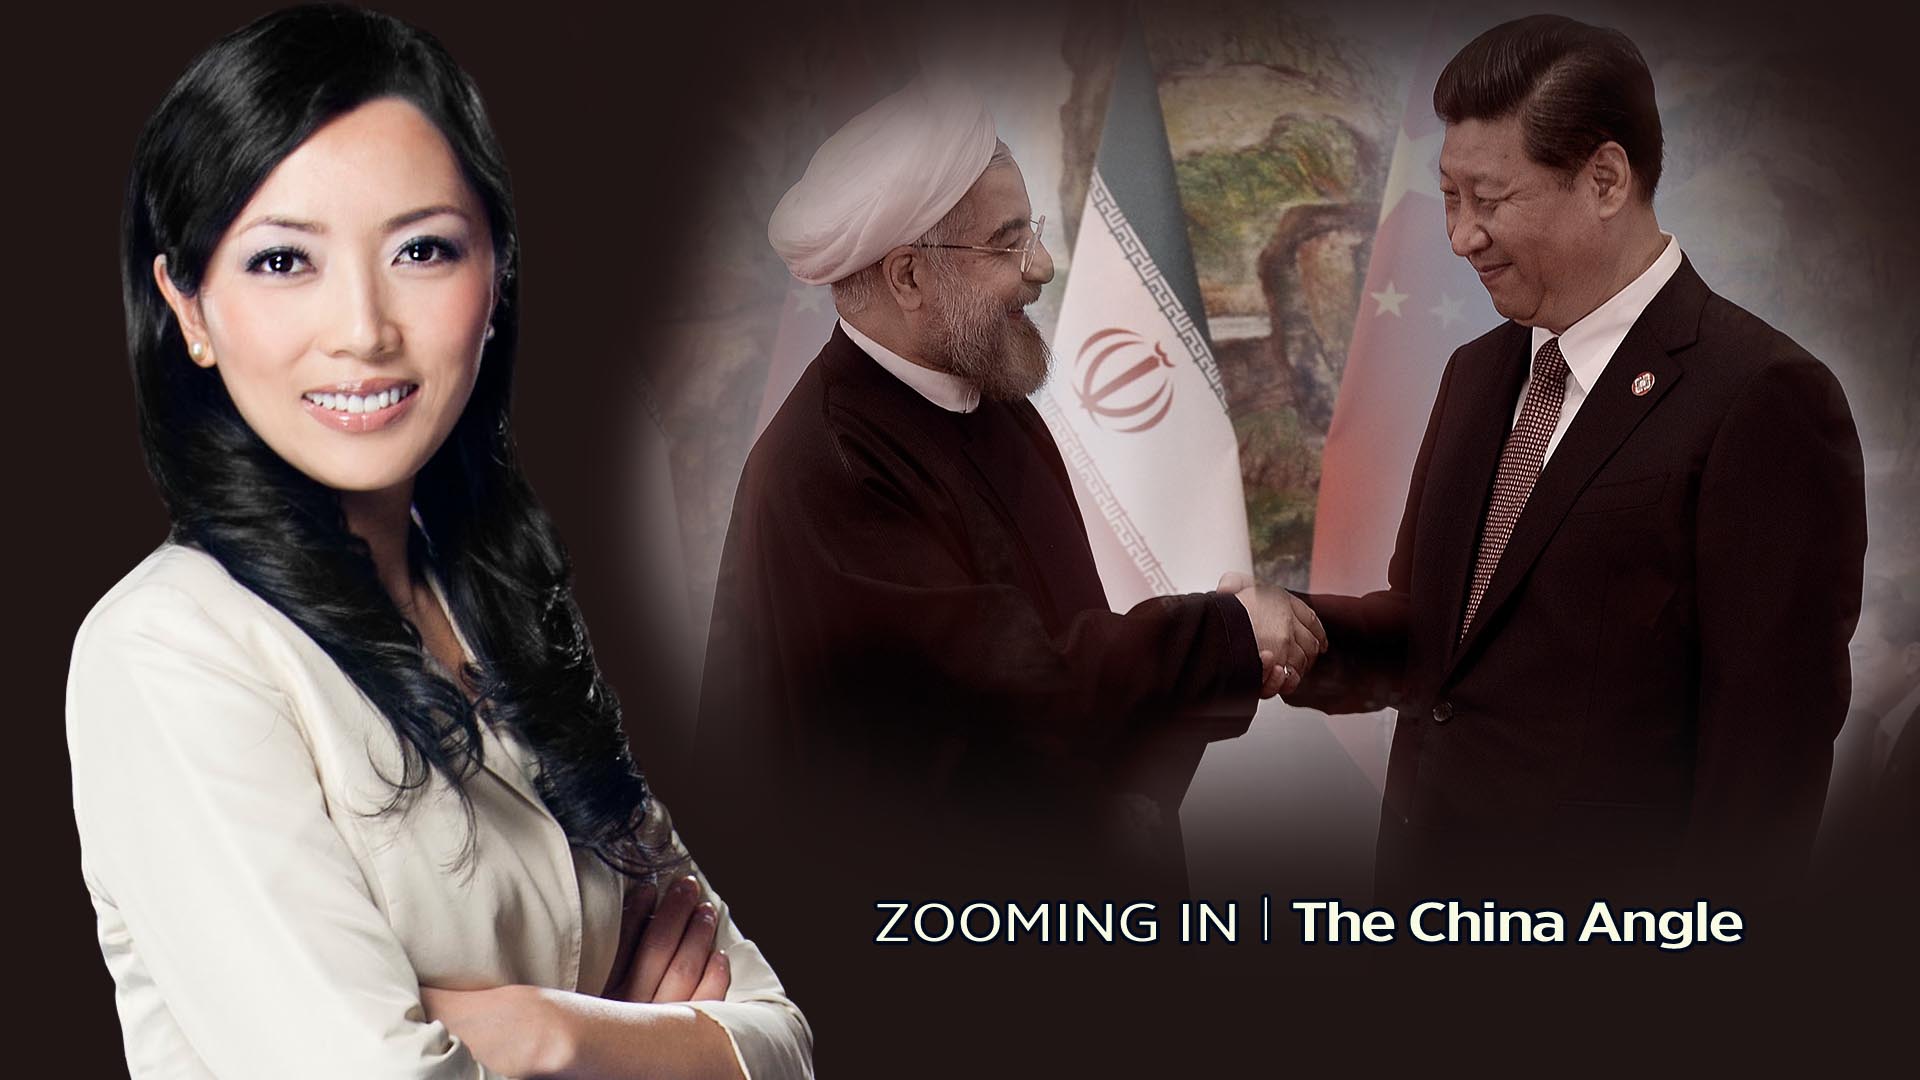 China and Iran Alliance, Road to New Axis Powers? – The China Angle with Simone Gao